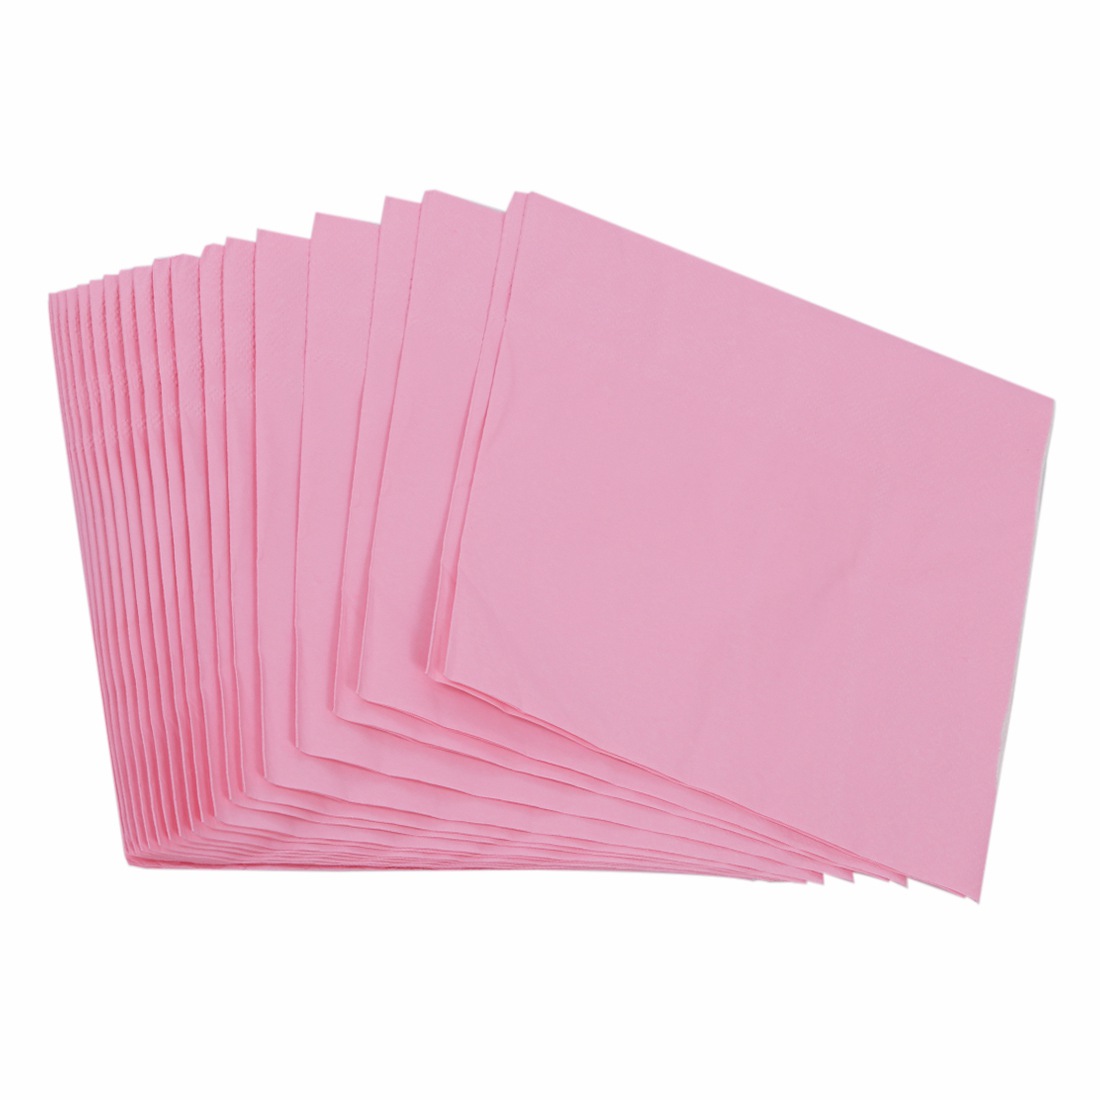 LHBL 1  ָ ÷ μ  Ų/LHBL 1 pack Solid Color Printed Paper Napkin